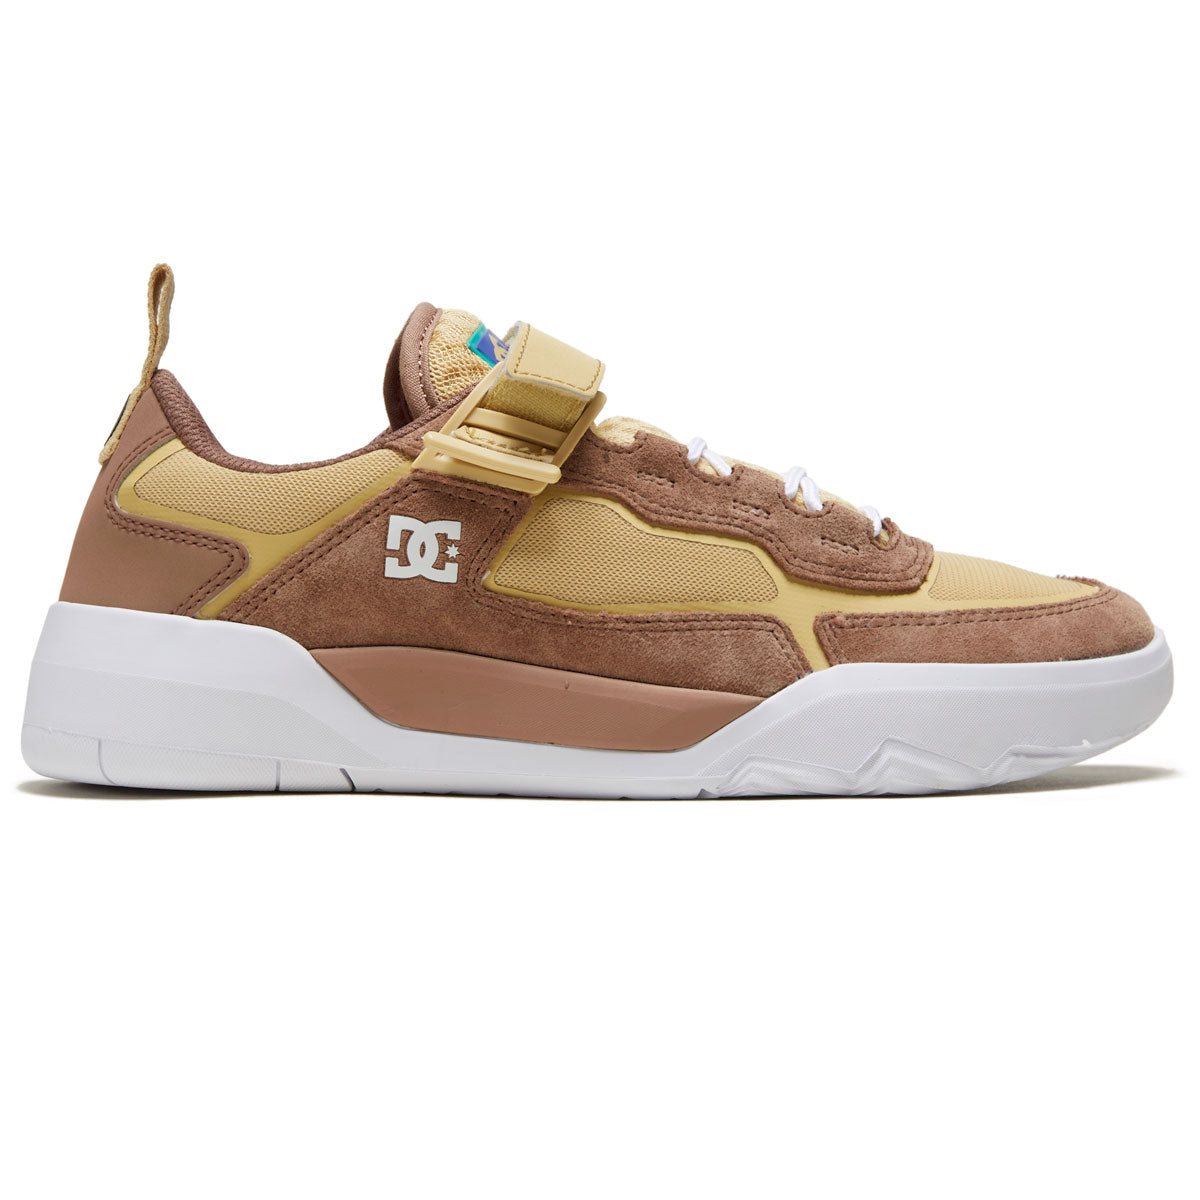 DC Metric S x Will Shoes - Brown/Tan image 1